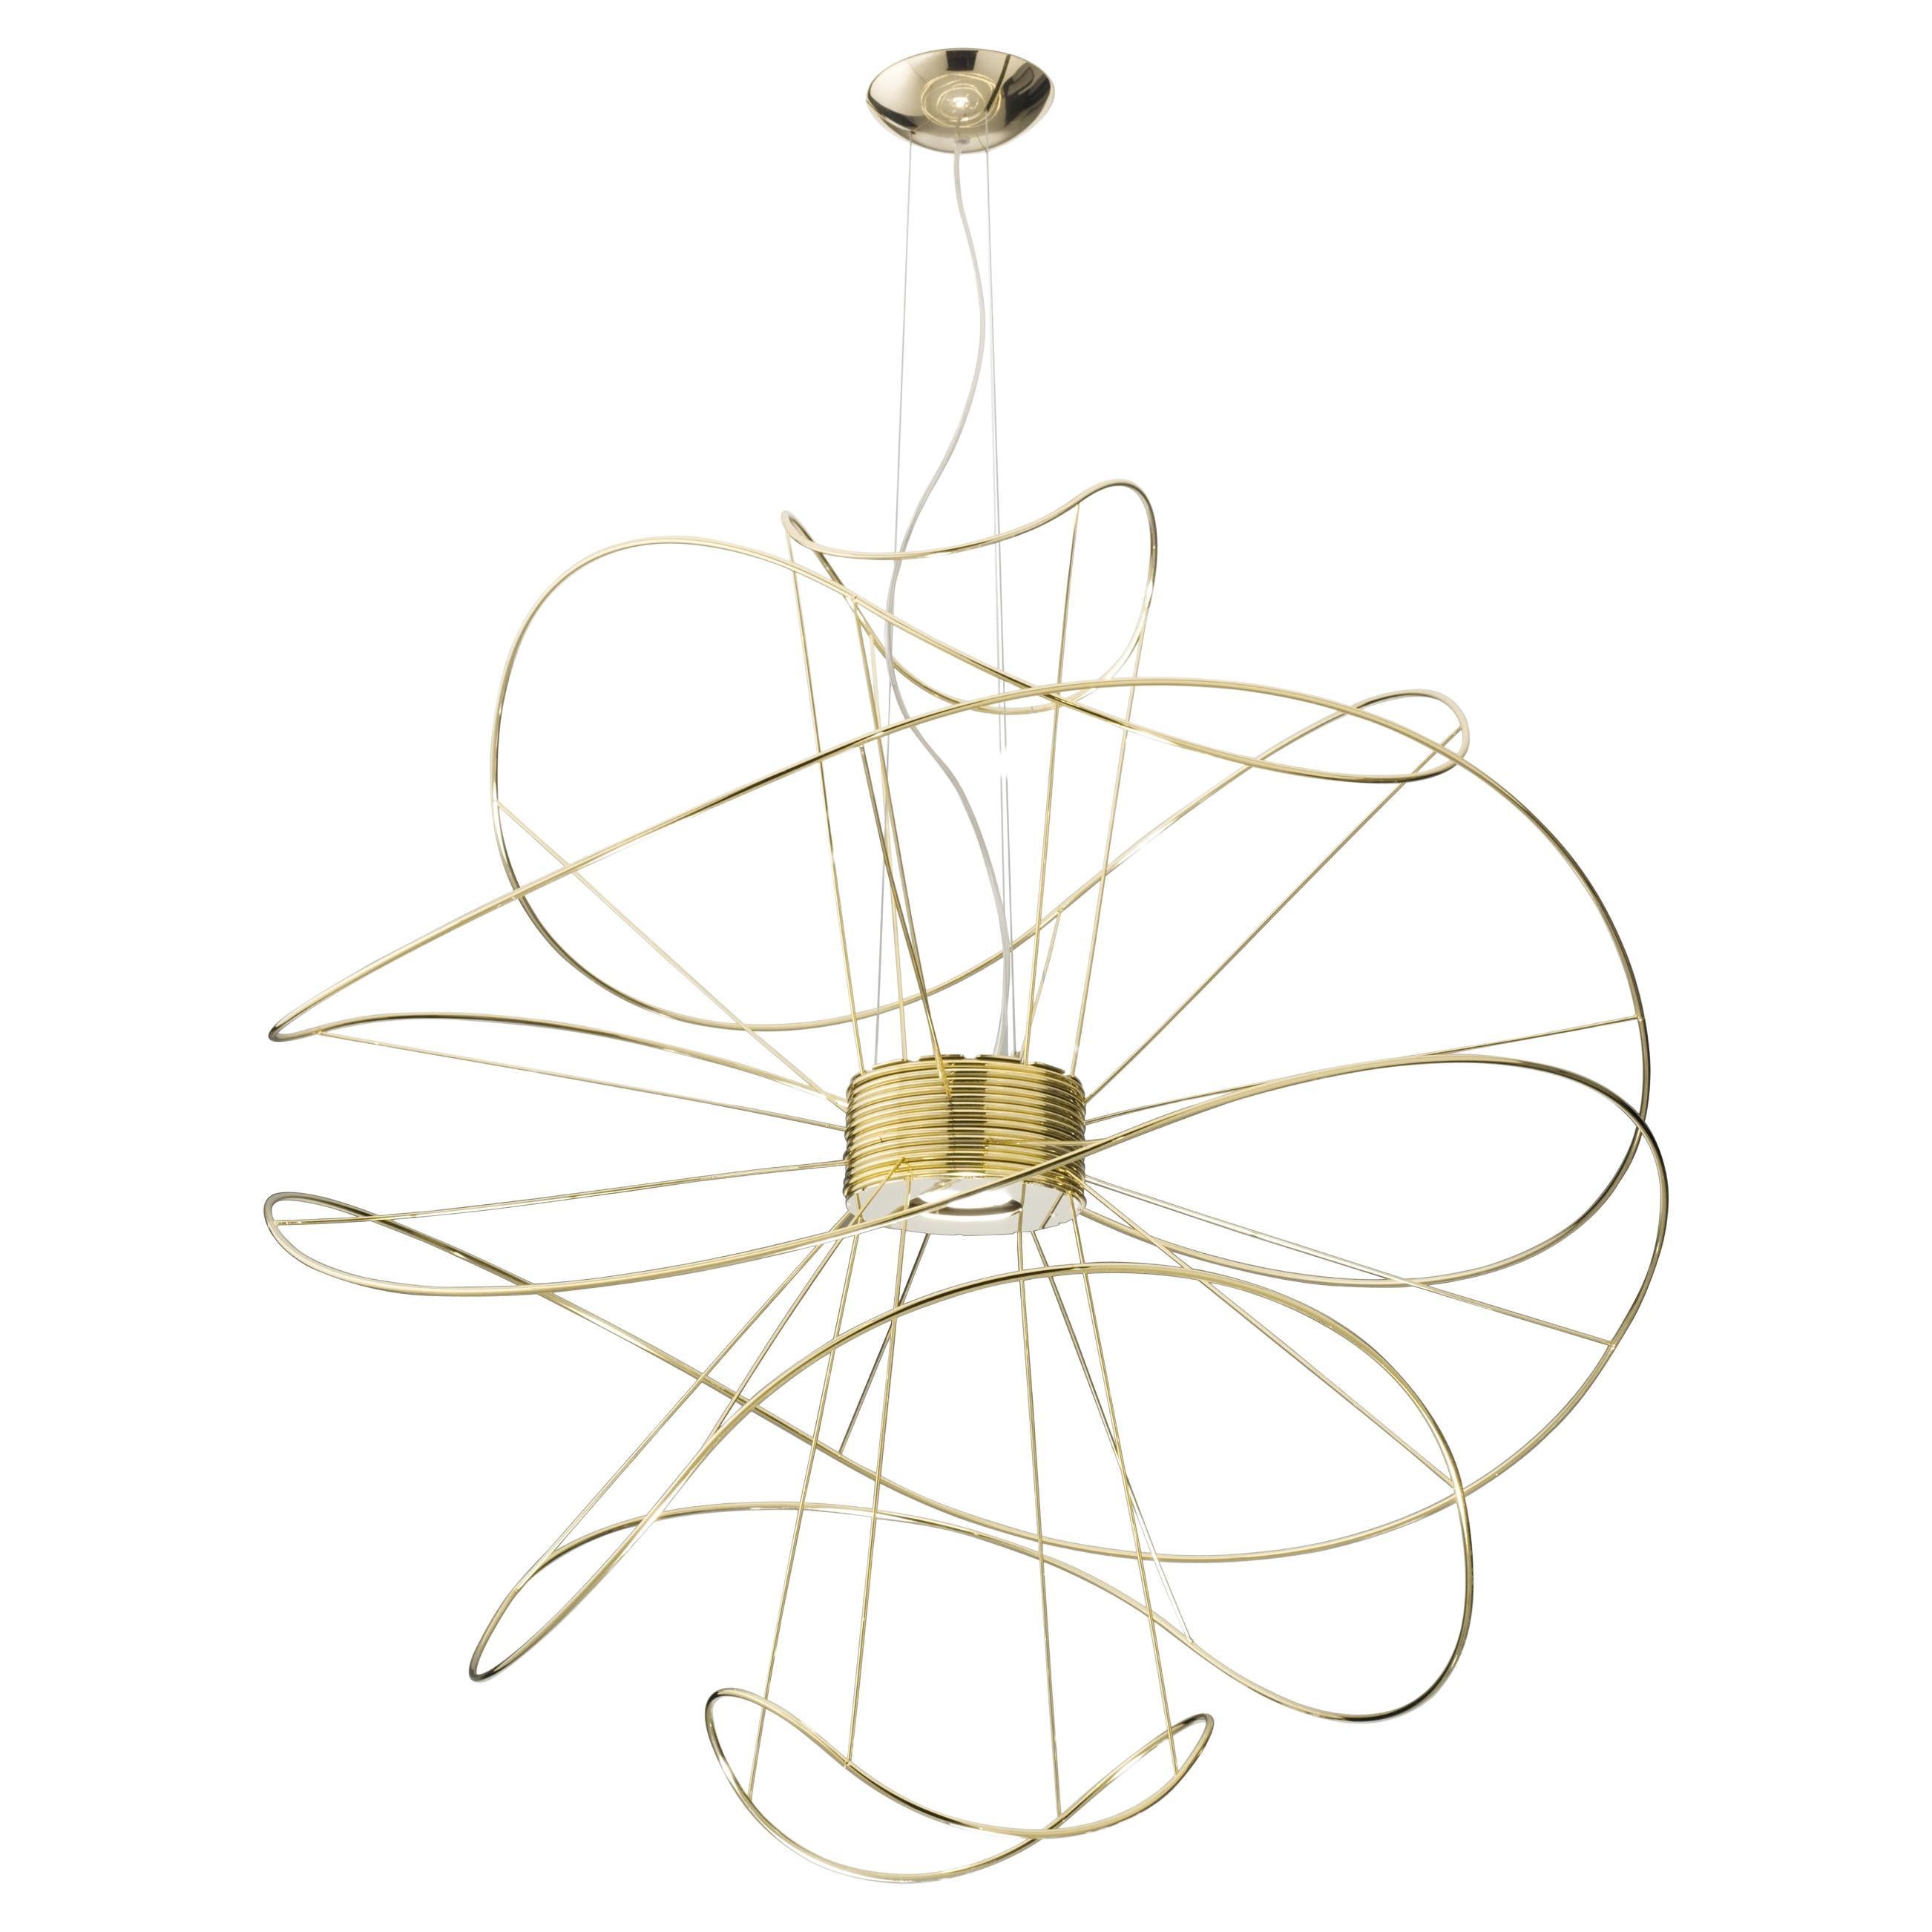 Axolight Hoops 6 Large Pendant Lamp in Gold by Giovanni Barbato